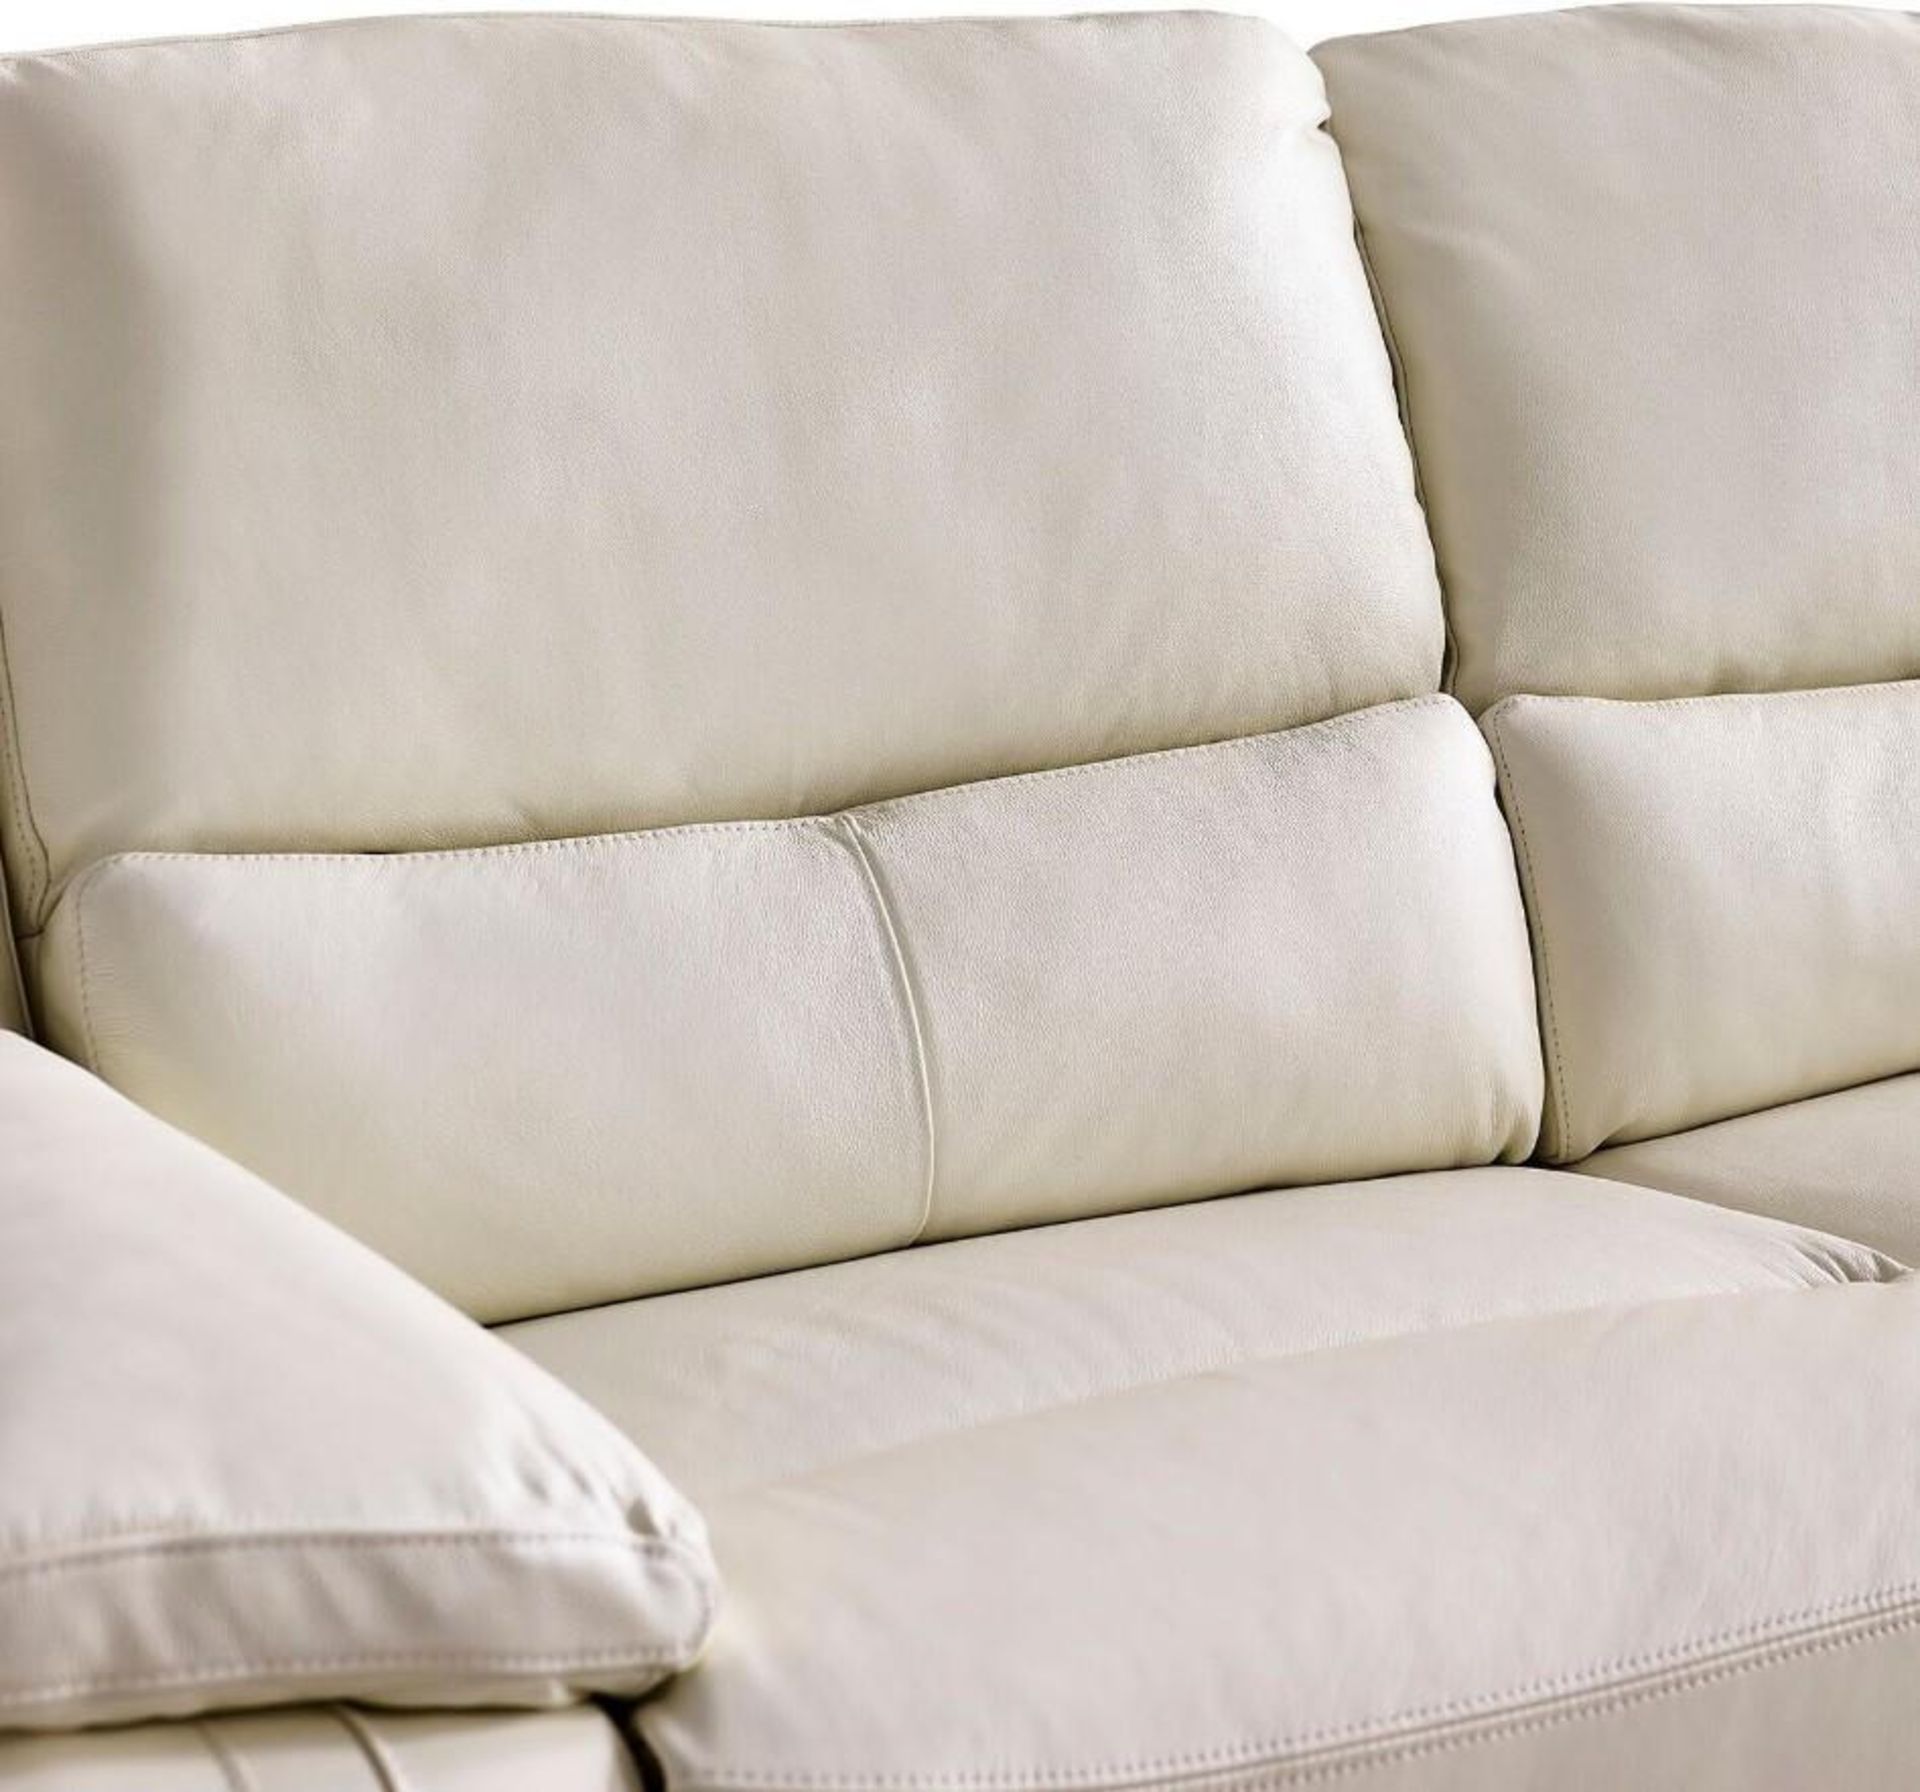 Brand new and boxed SCS Fallon 2 seater electric reclining sofa in Cream. - Bild 5 aus 7